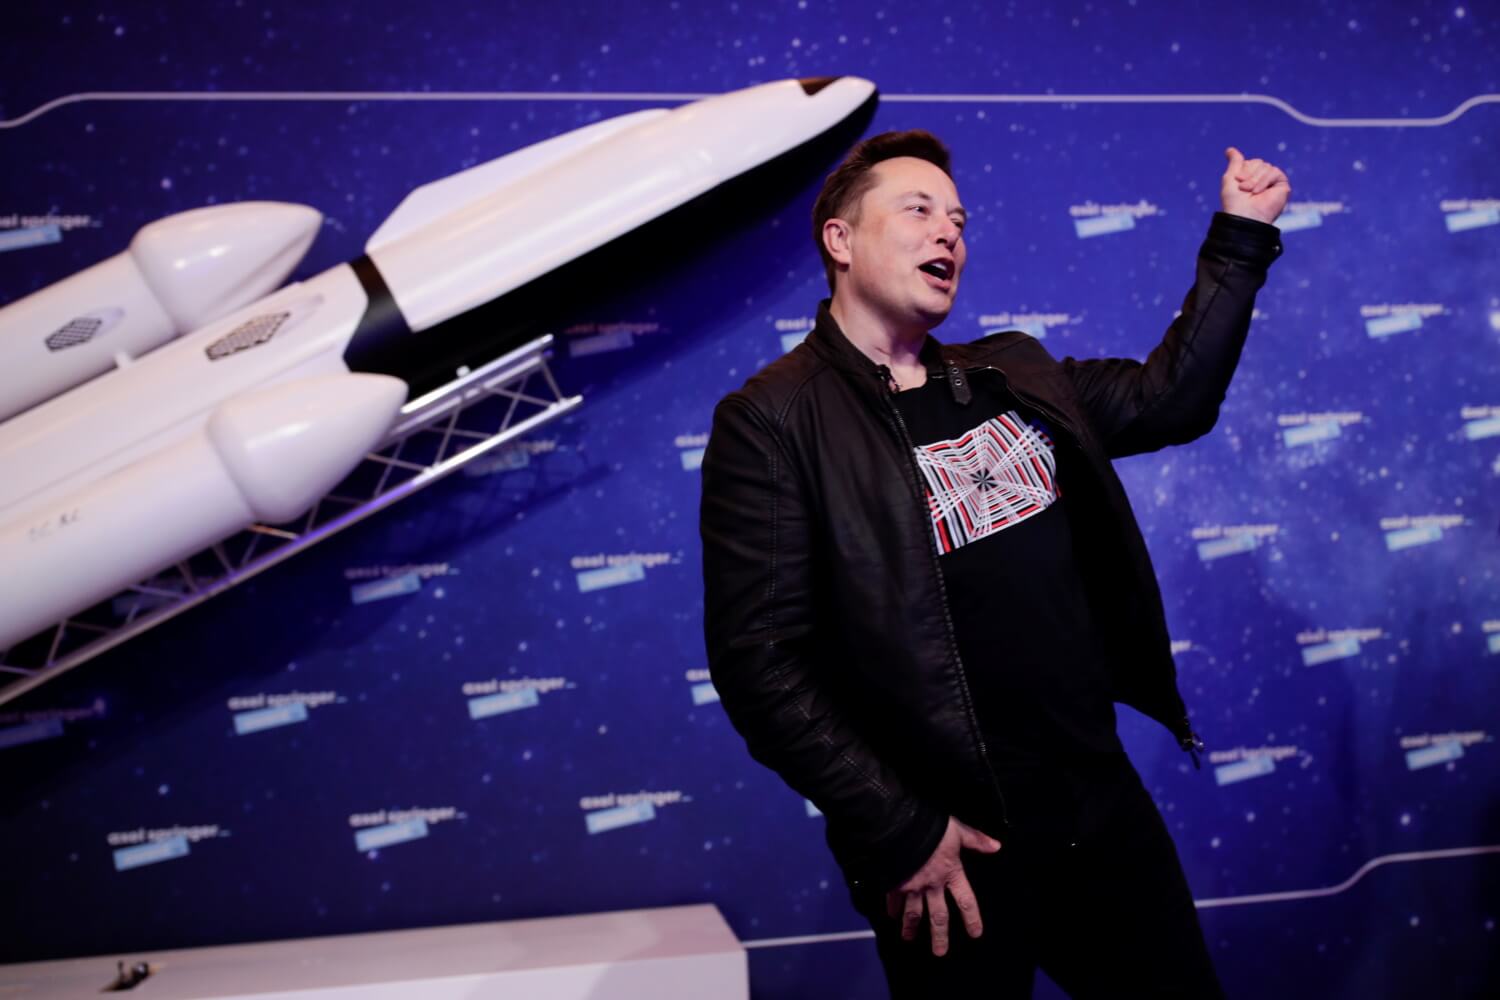 Elon Musk tweets about SpaceX, driving interest and curiosity towards Mars.